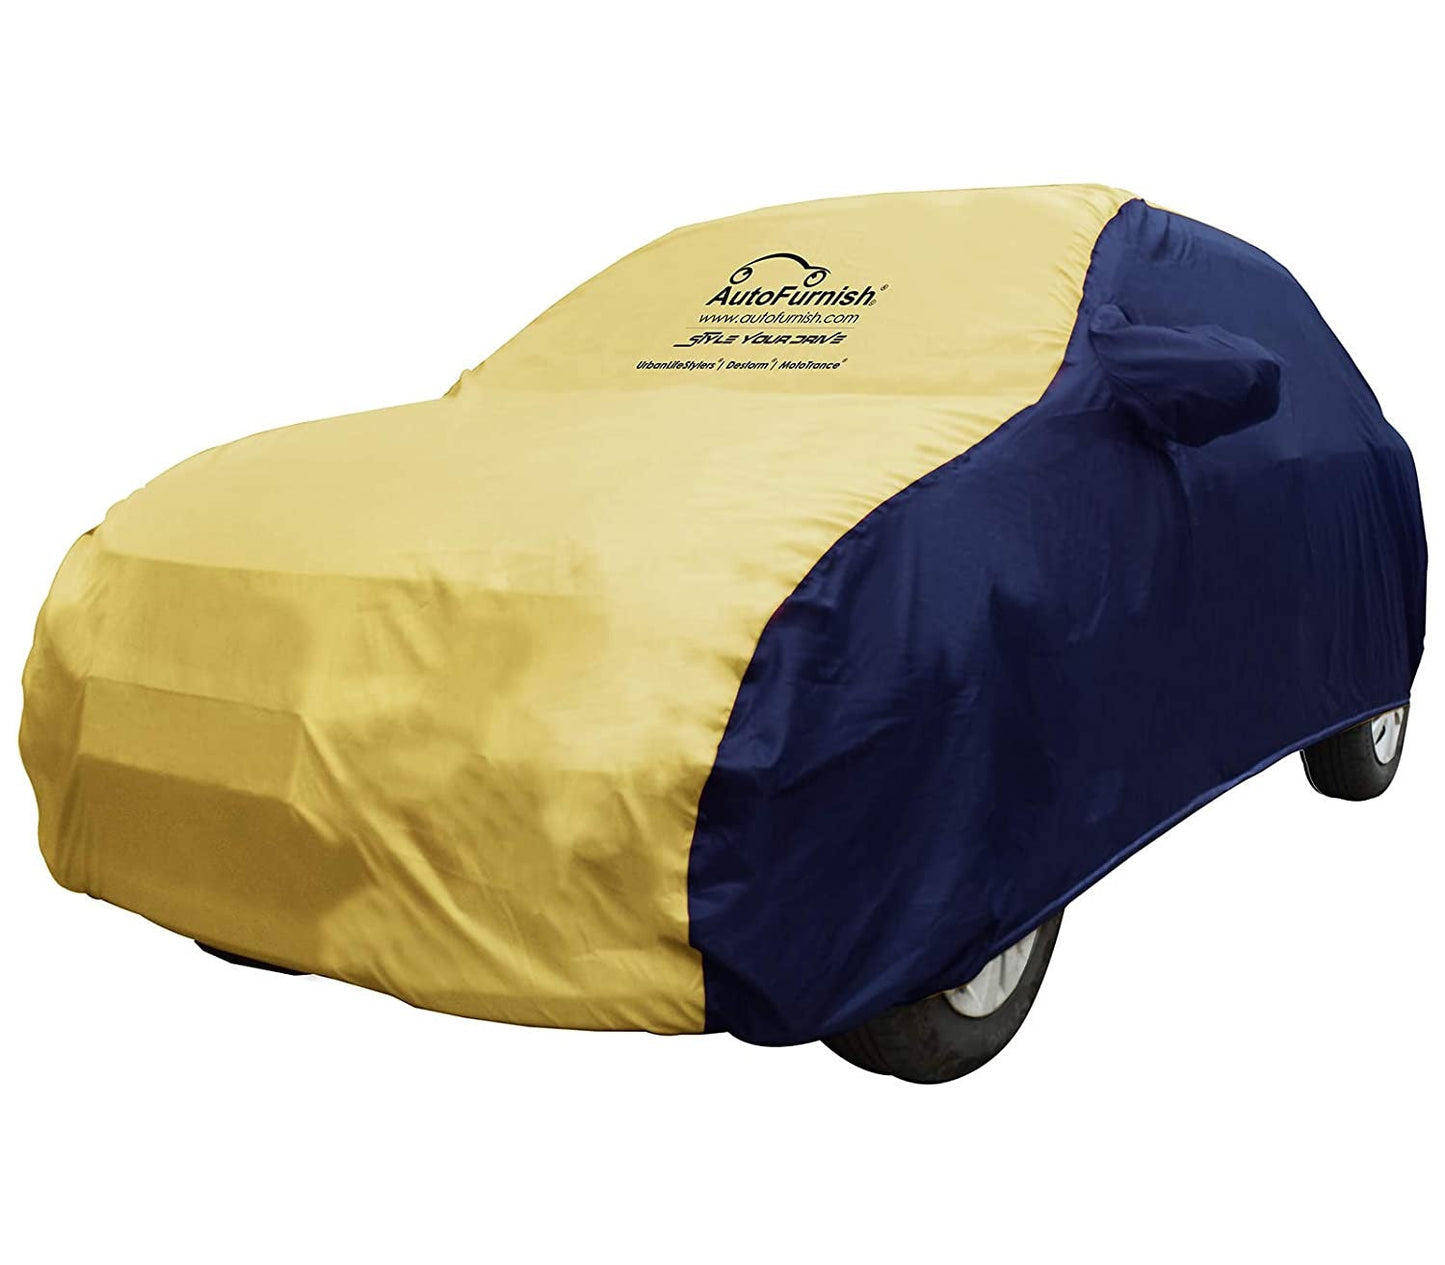 Honda City (2020) Car Body Cover, Triple Stitched, Heat & Water Resistant with Side Mirror Pockets (SPORTY Series)